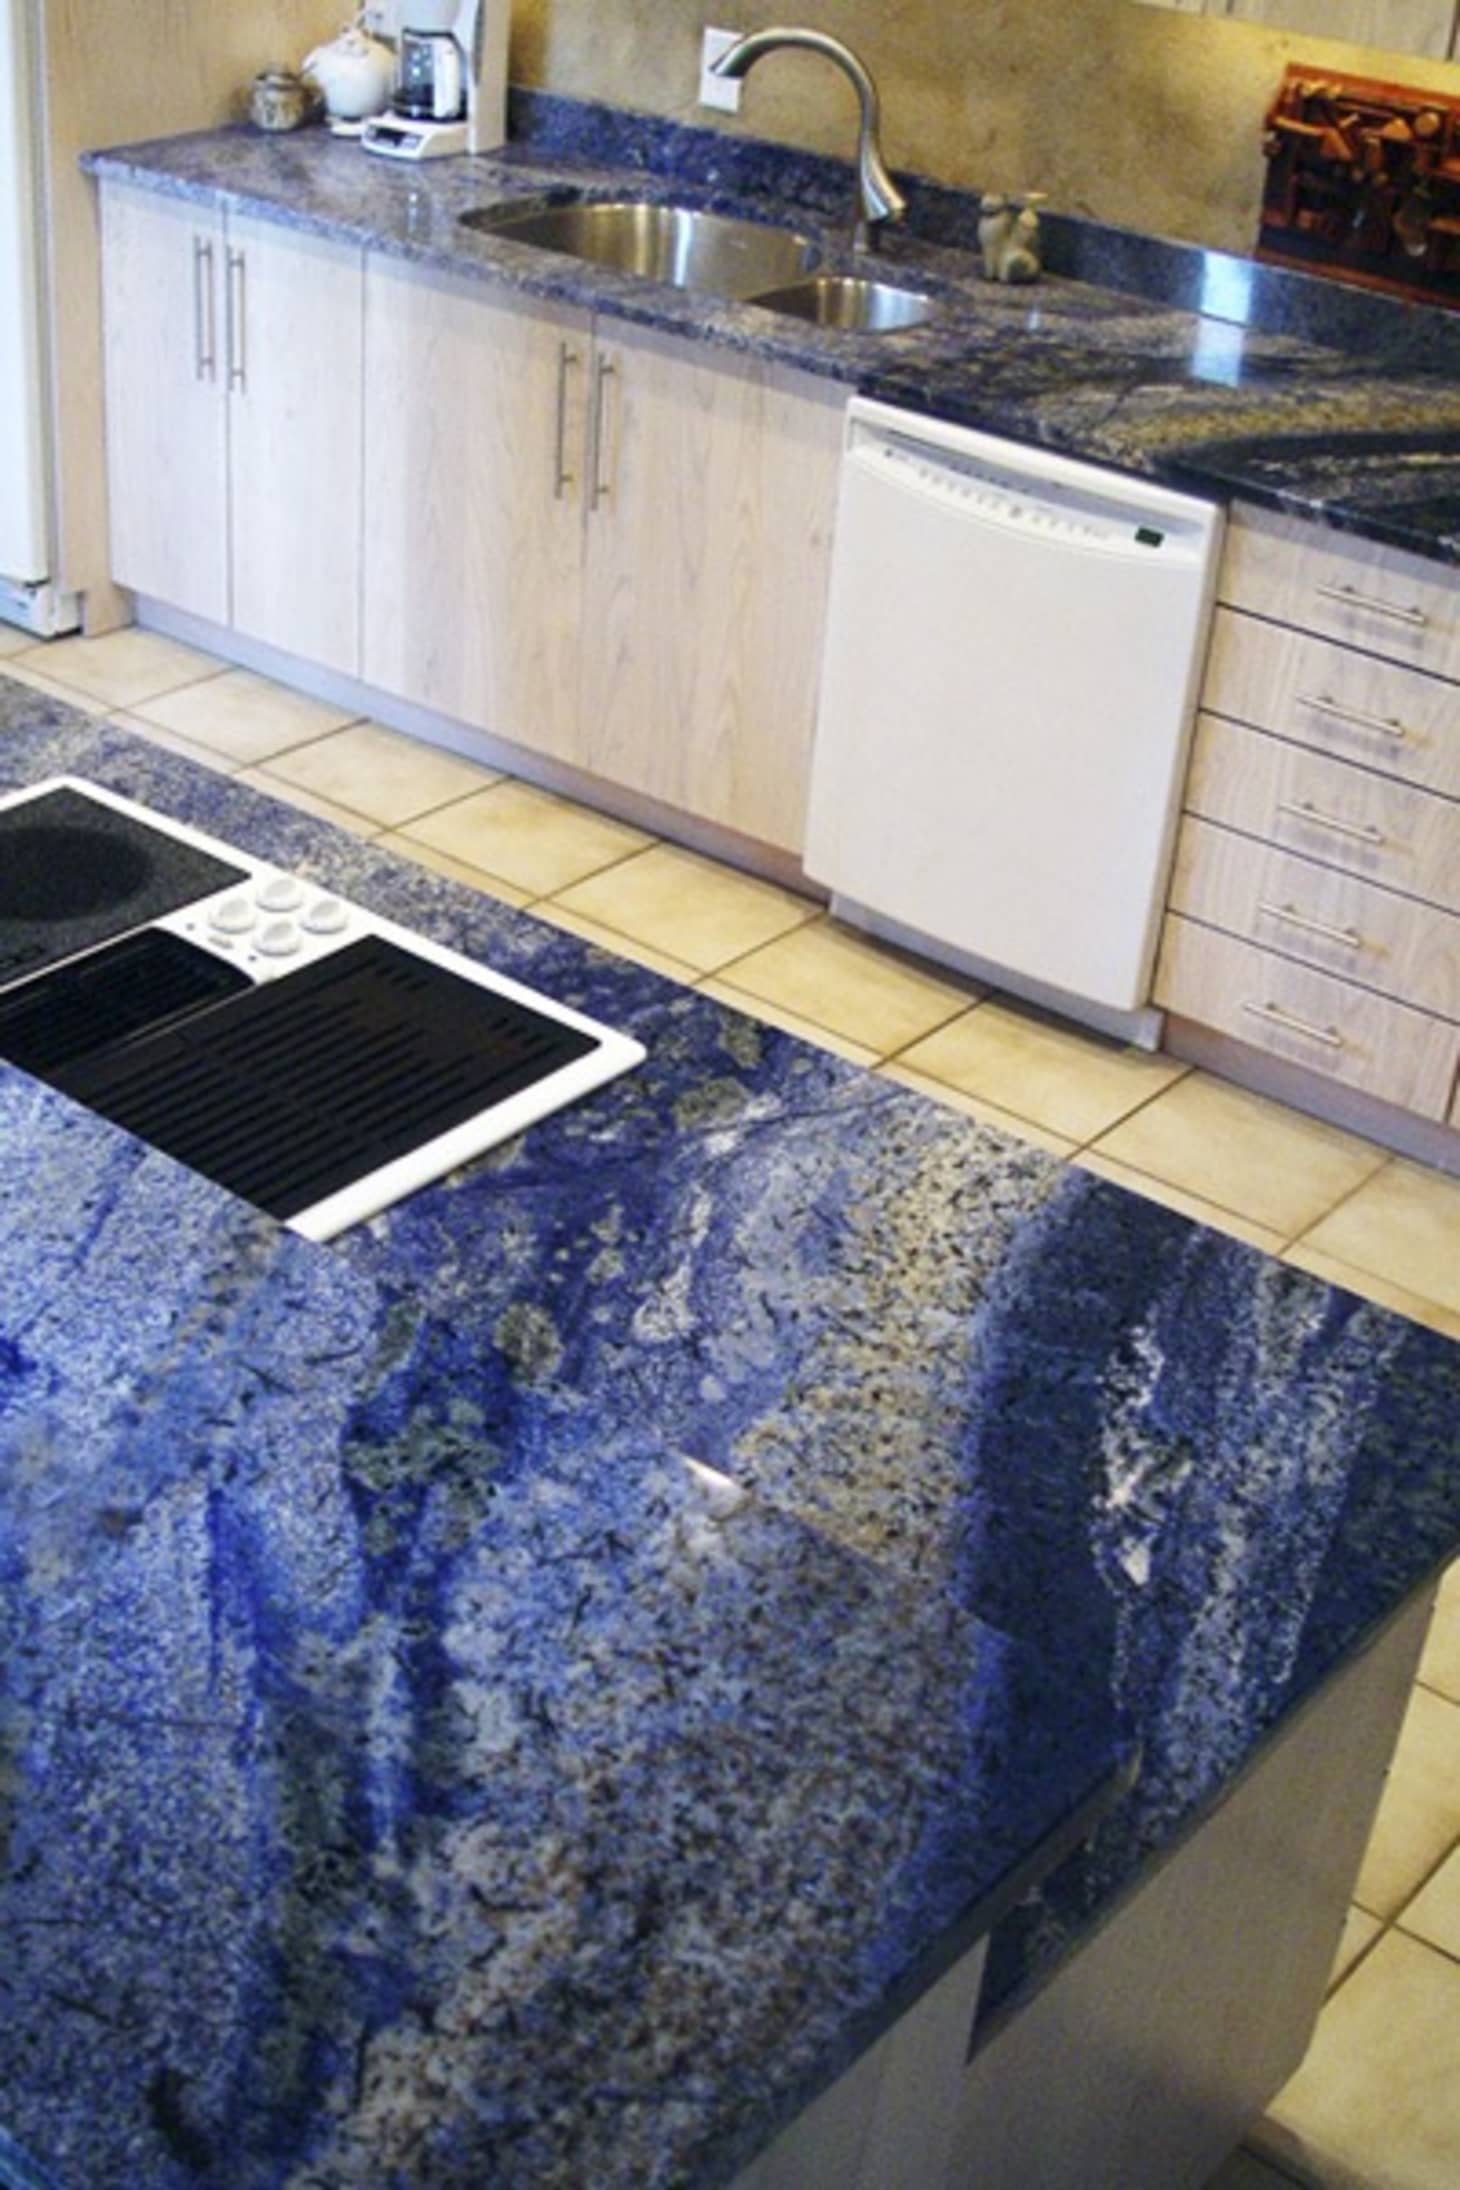 Considering Blue Bahia Granite Let These Interiors Sway You